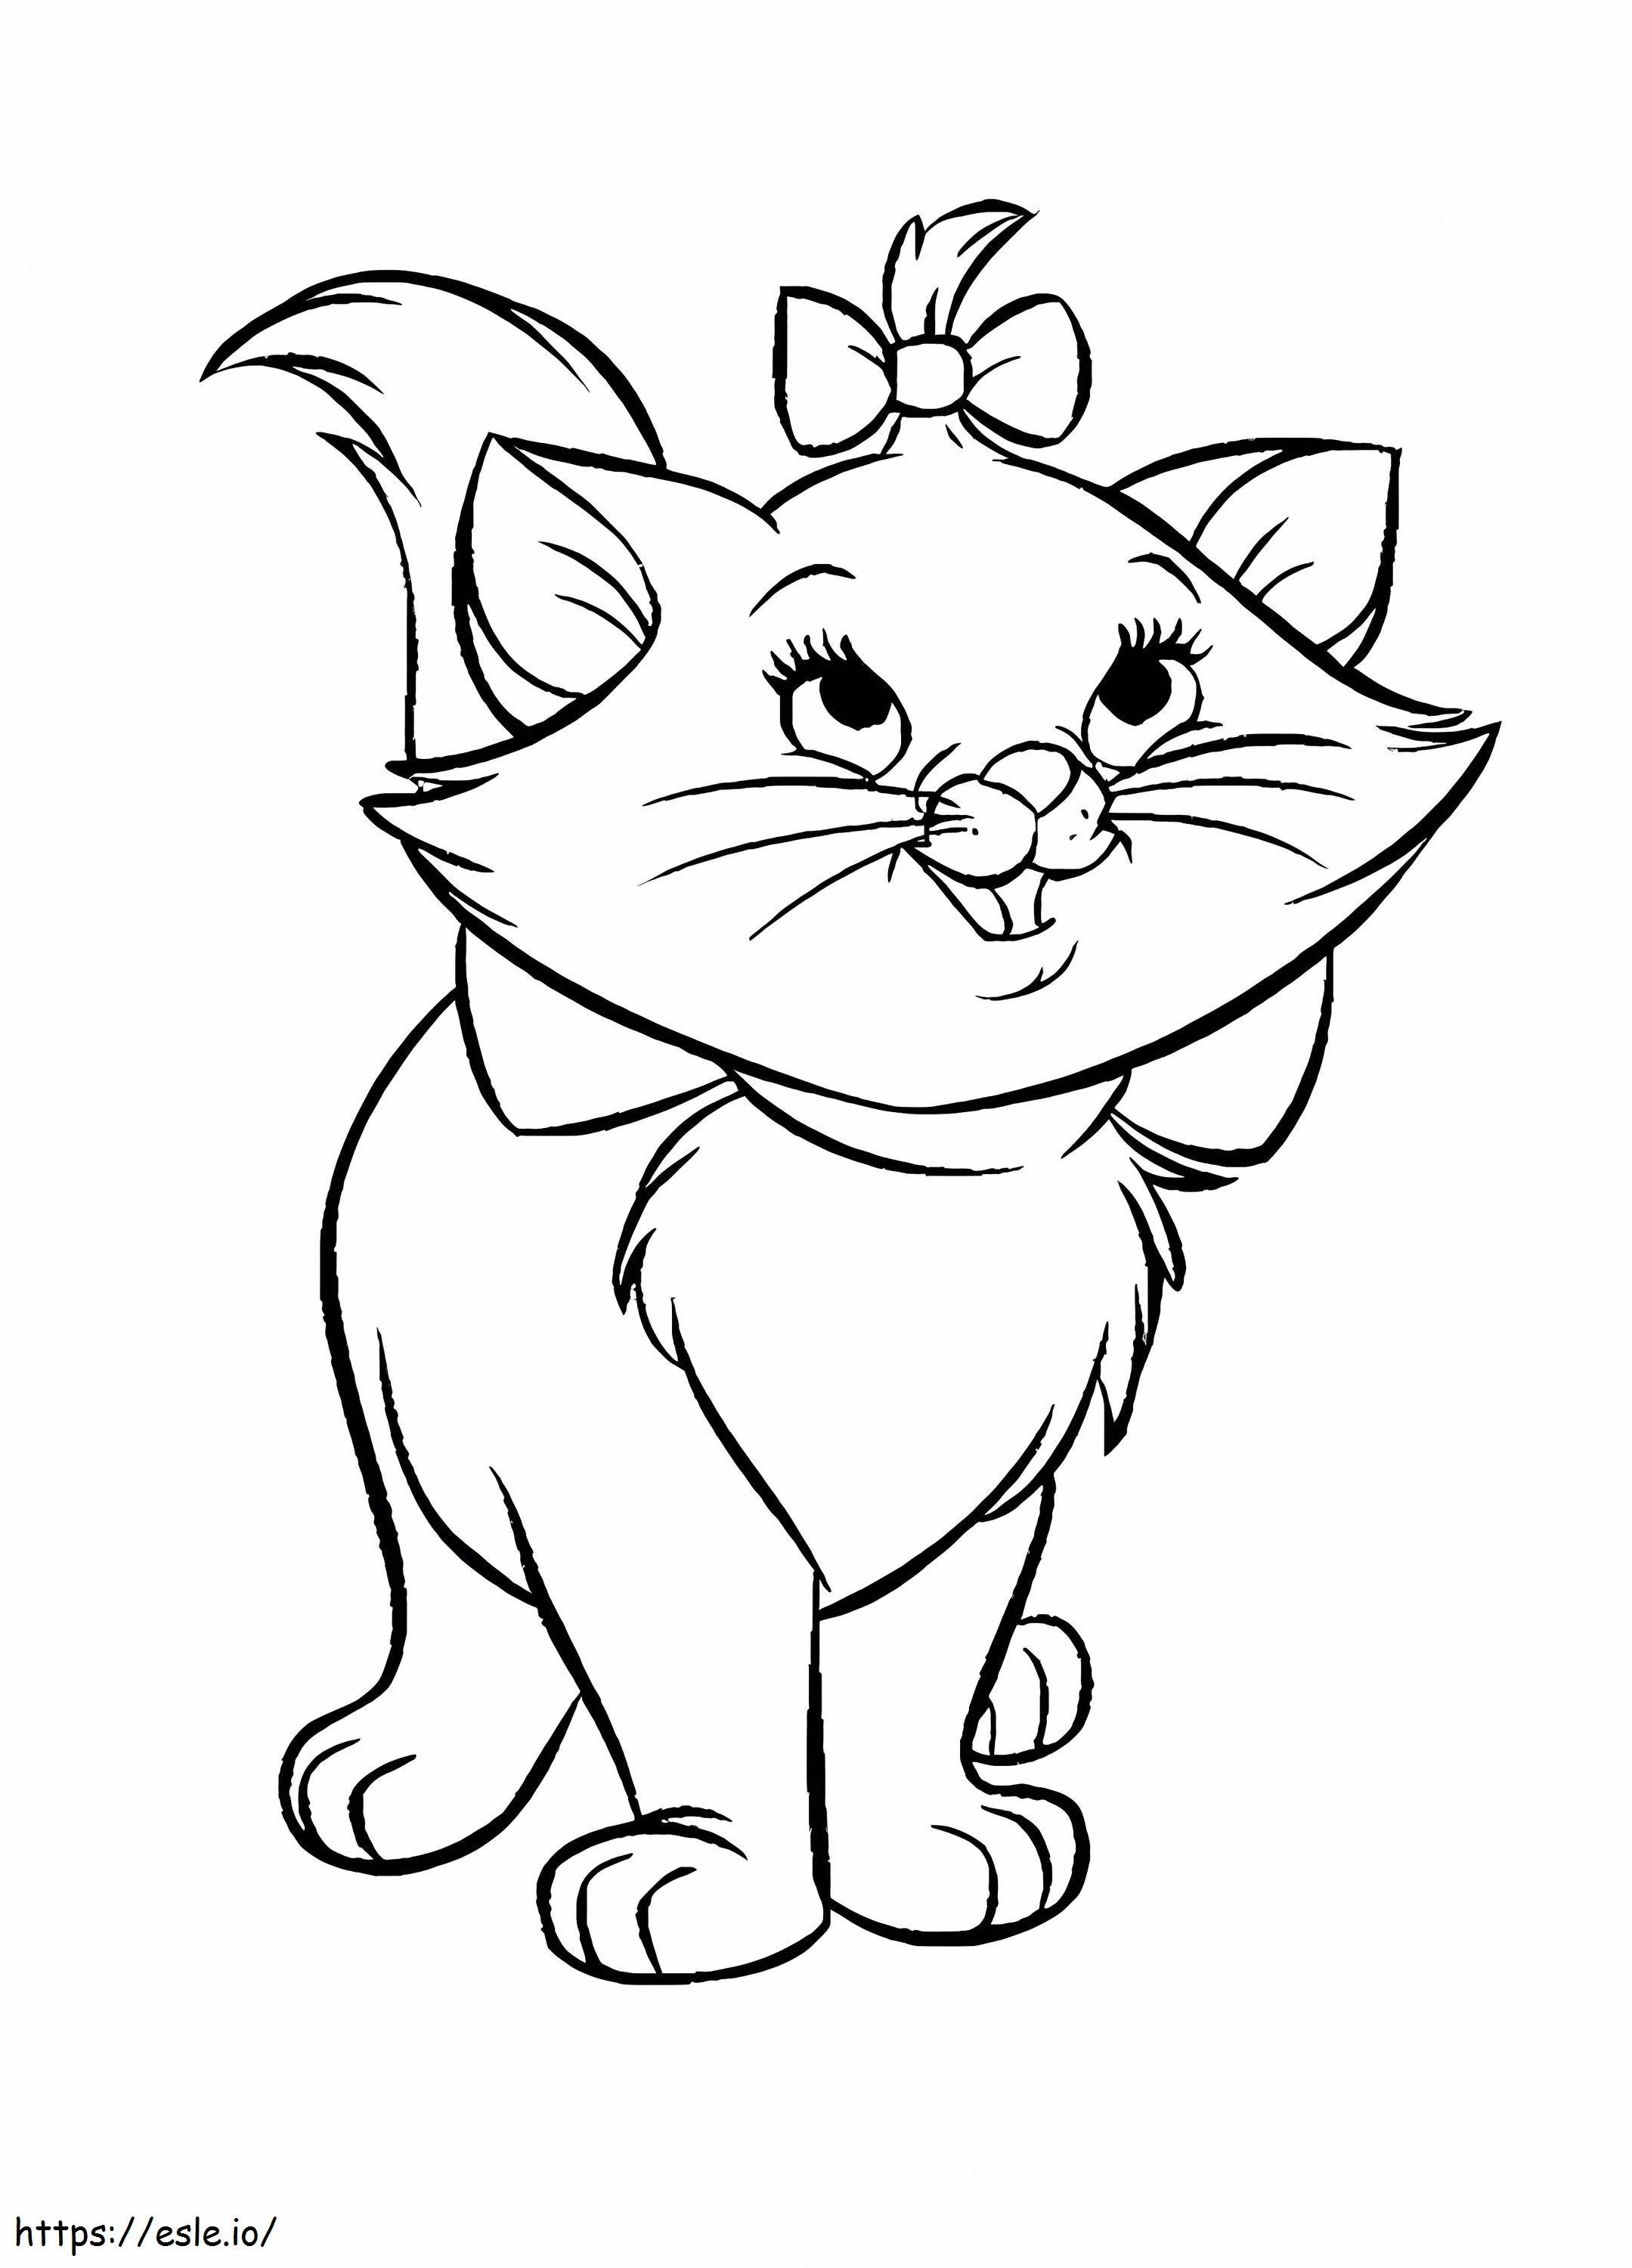 The Aristocats Marie coloring page